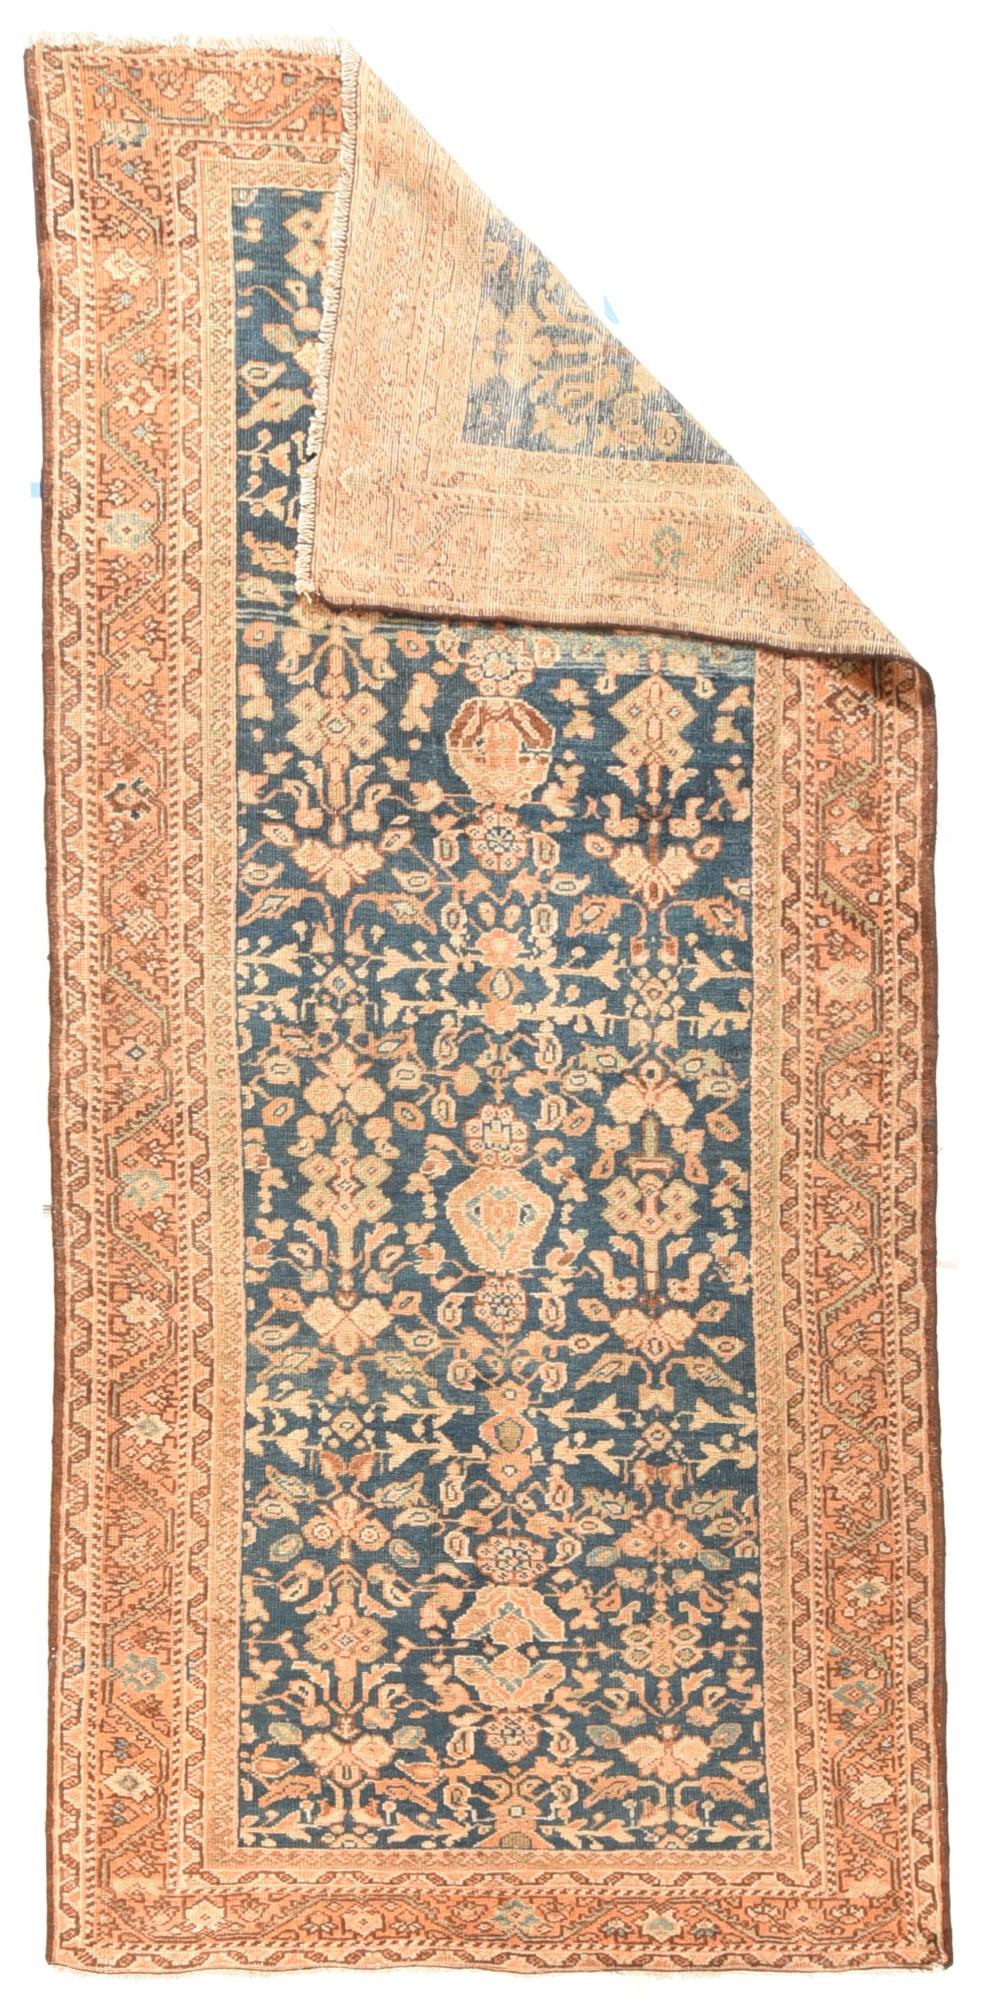 Antique Mahal Sultanabad rug measure 4'2'' x 9'4''. From Western Persia, this Kellegi (long rug) shows an abrashed sapphire ground with an essentially three column allover pattern of petal-winged palmettes, rosettes, horizontal short stems, and